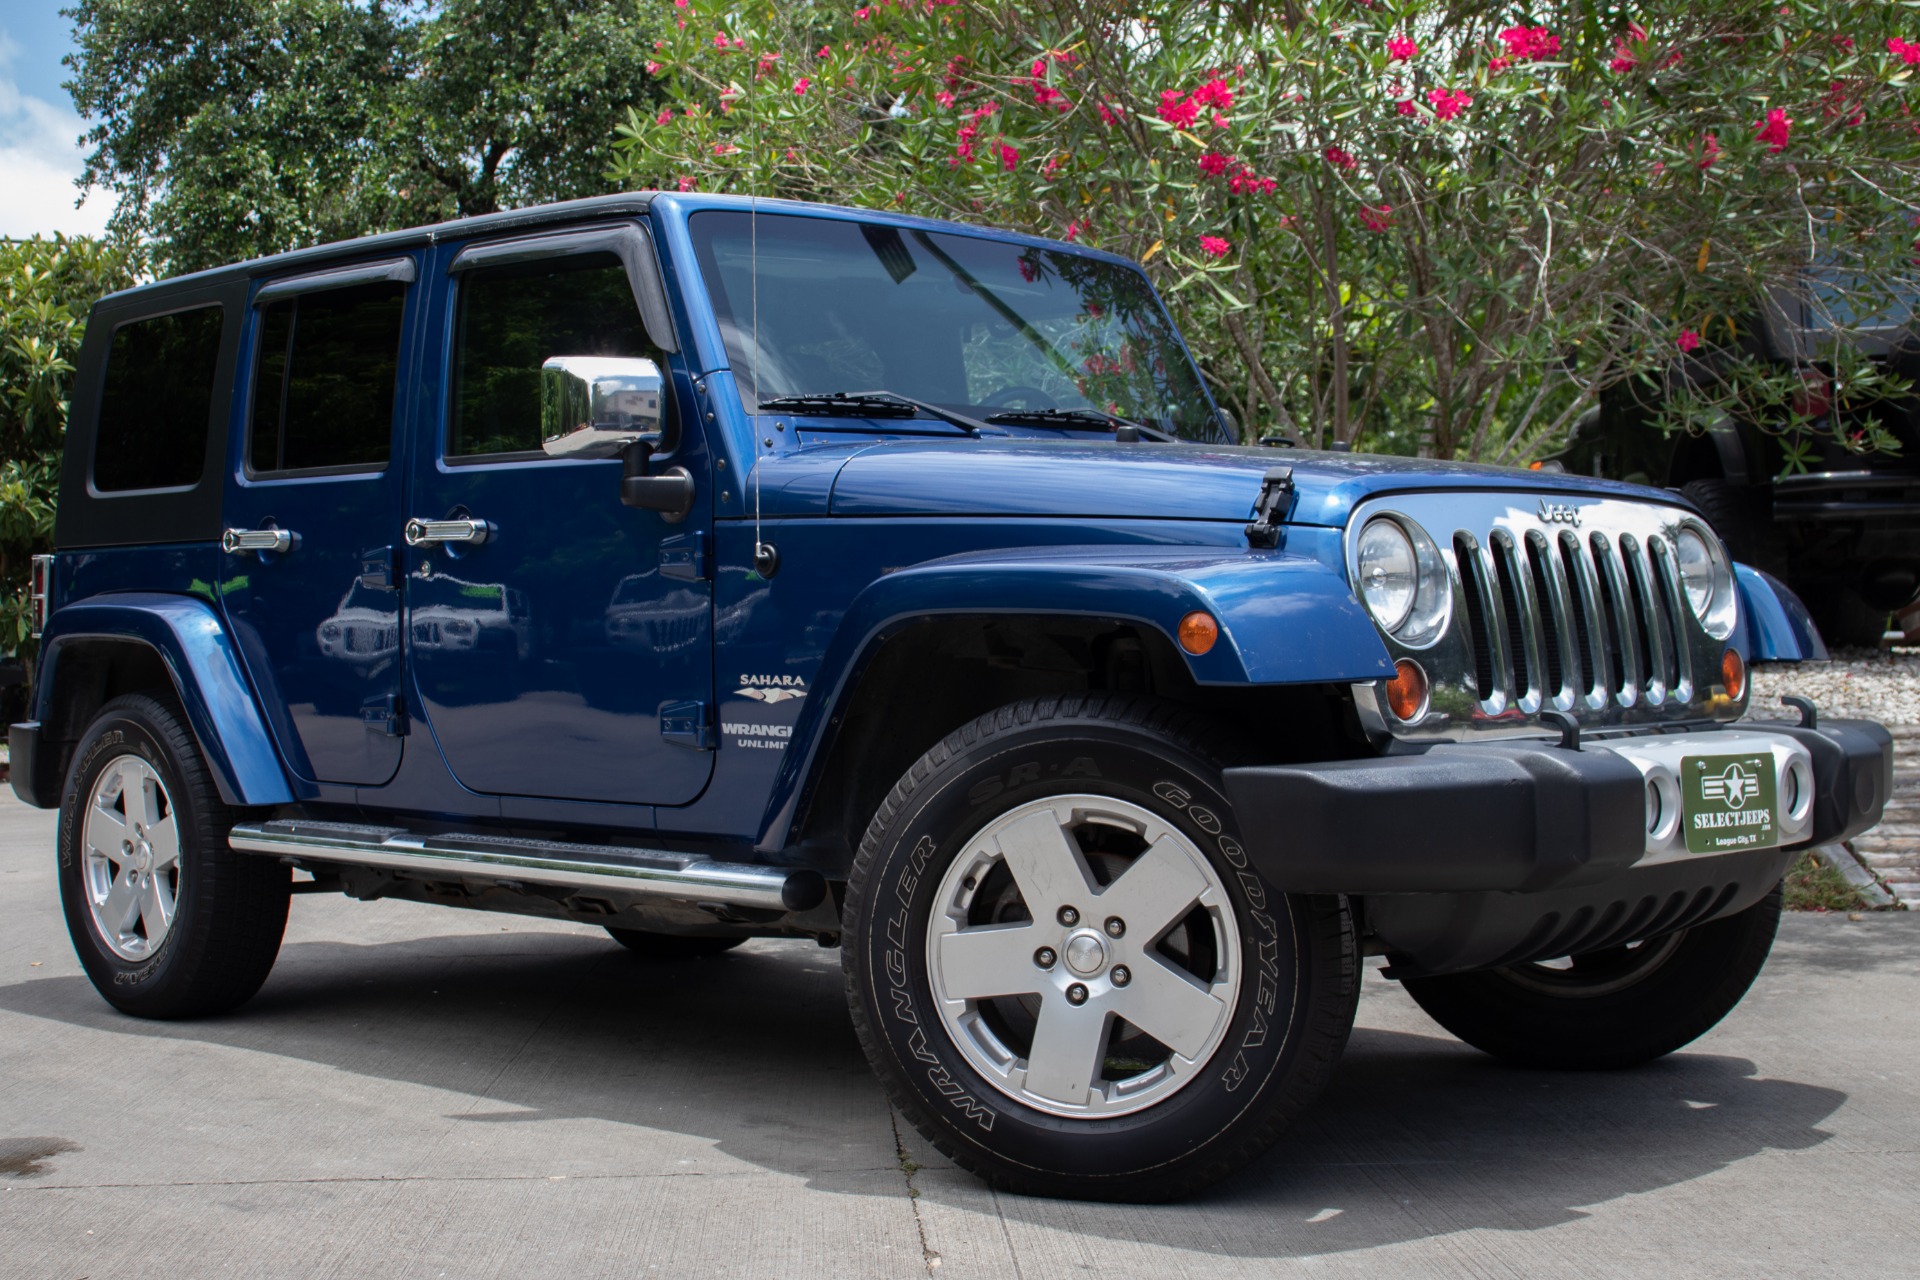 Used 2010 Jeep Wrangler Unlimited Sahara For Sale ($21,995) | Select Jeeps  Inc. Stock #219062